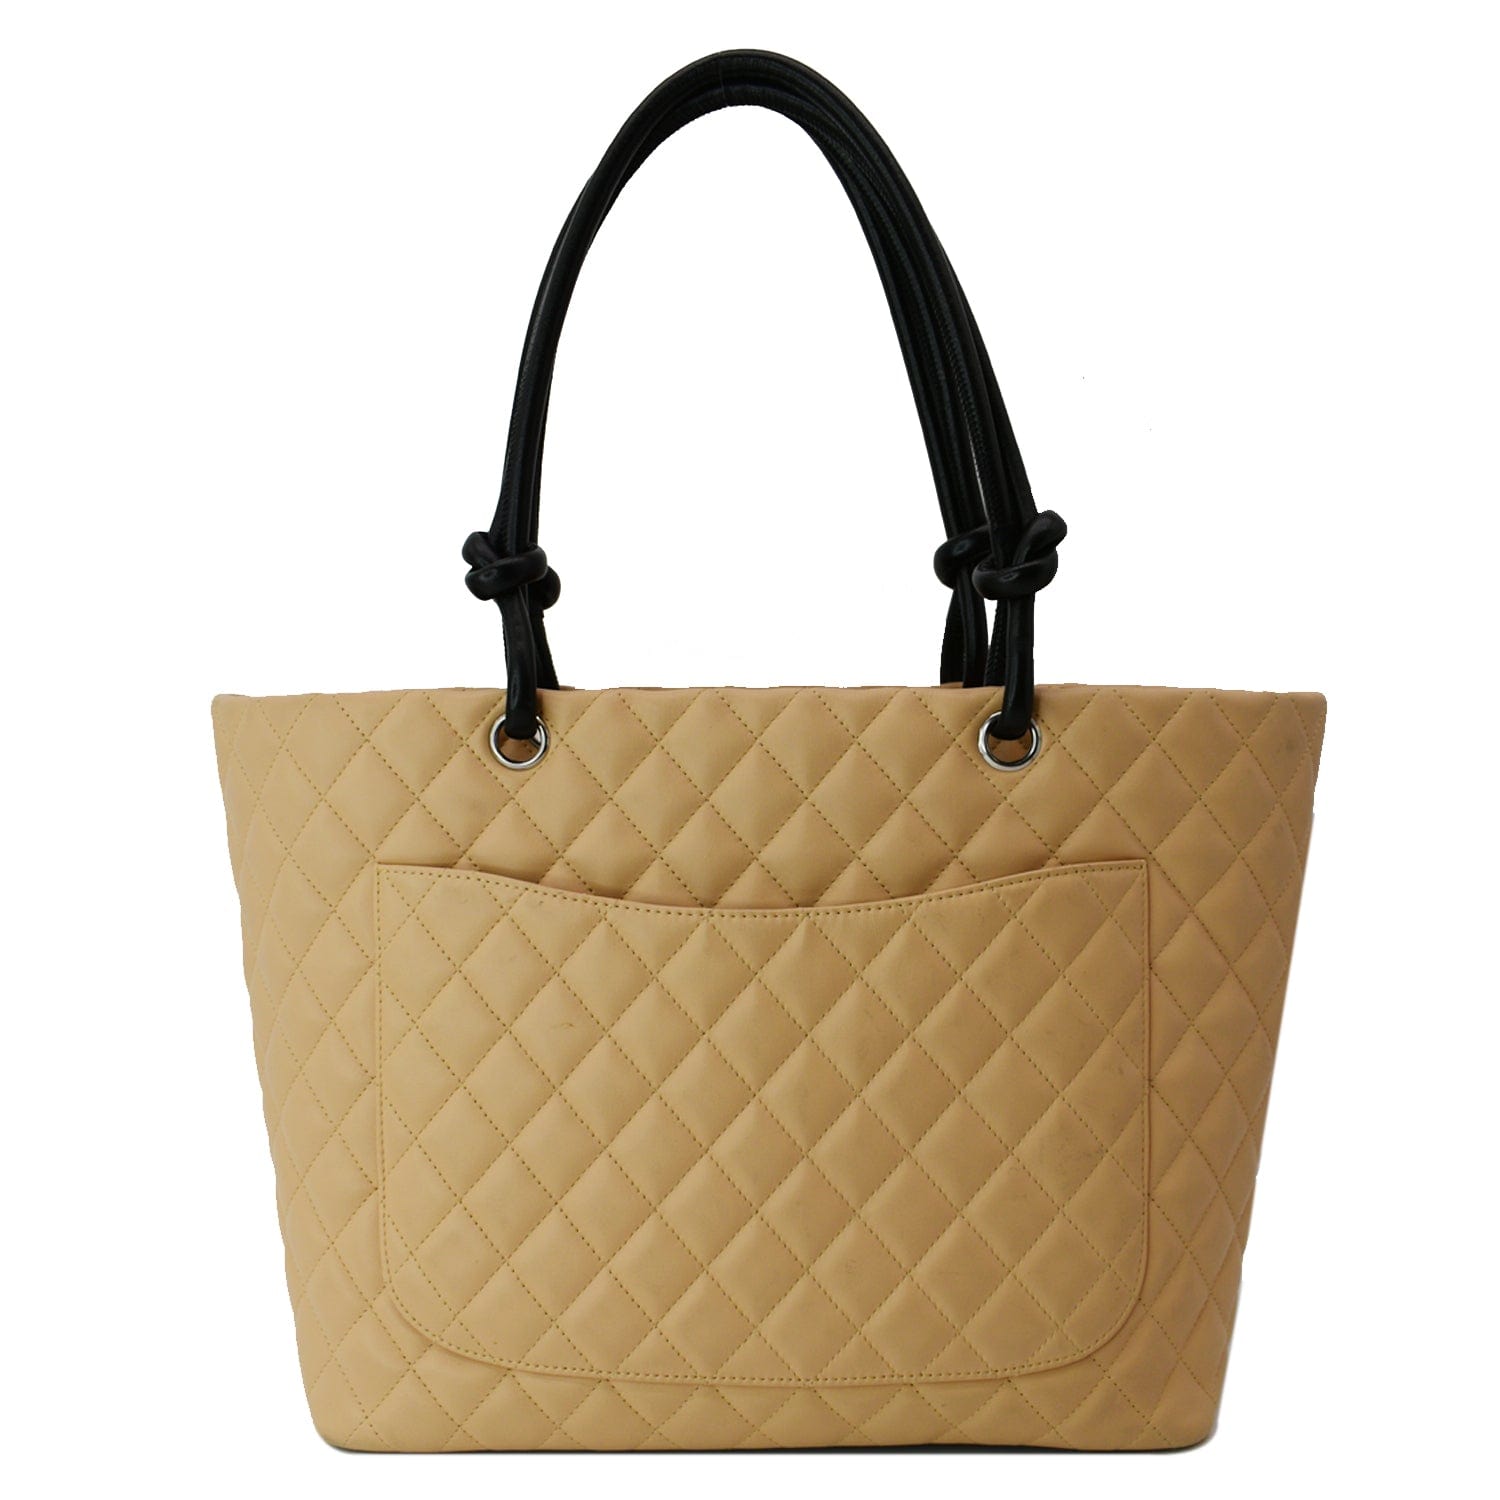 CHANEL Beige Quilted Leather Ligne Cambon Large Tote Bag E4088